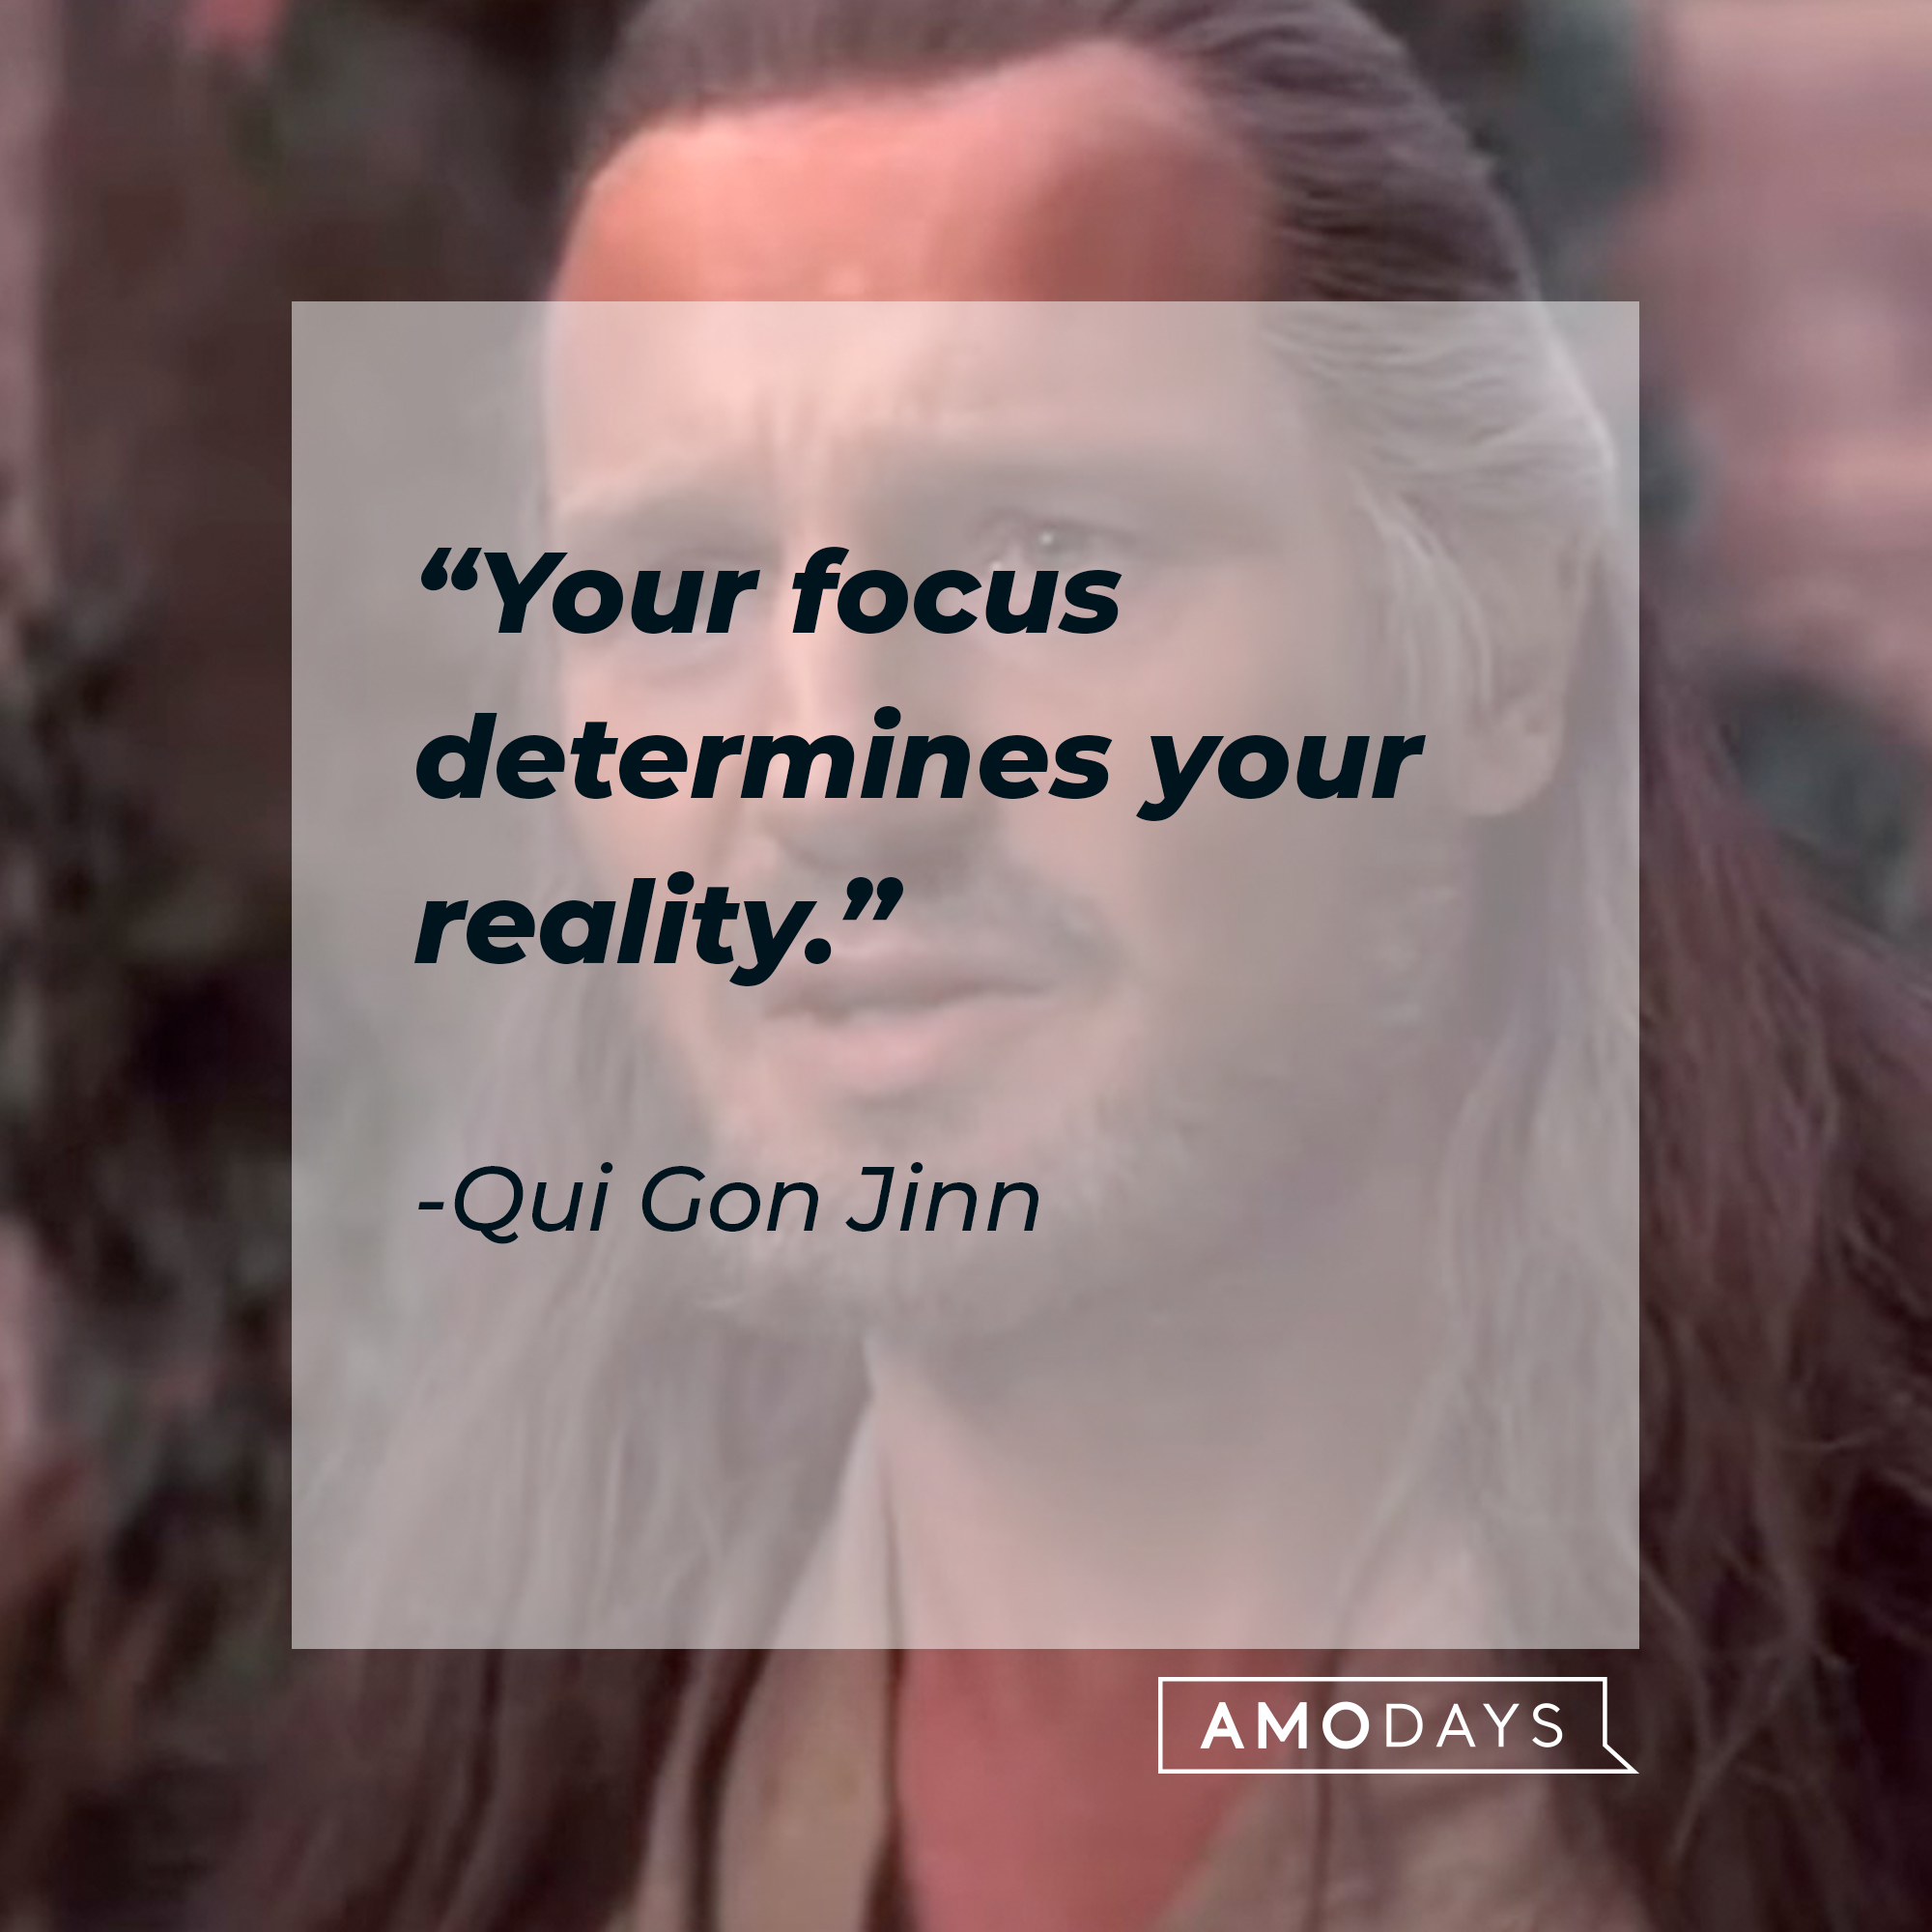 A picture of Qui Gon Jinn with a quote by him: “Your focus determines your reality.” | Source: facebook.com/StarWars